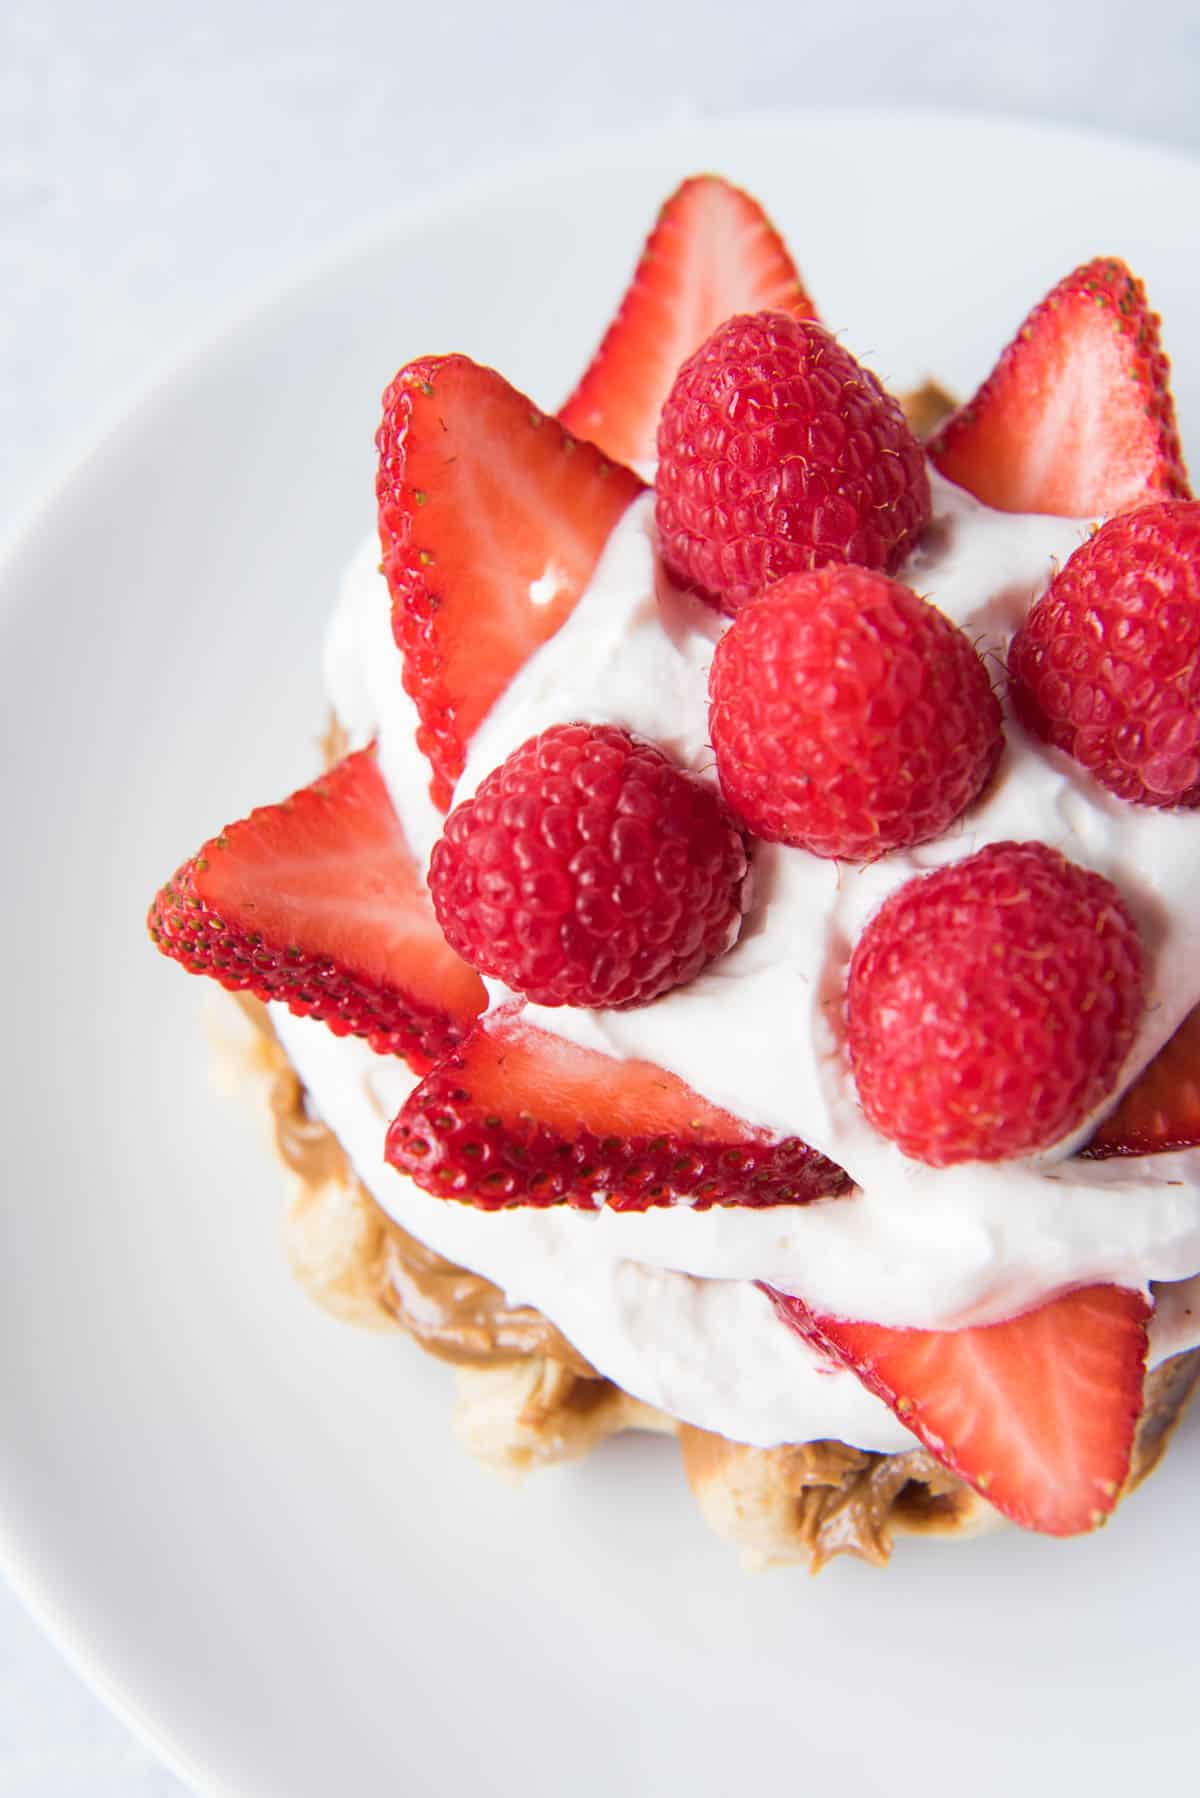 A cream and berry topped waffle on a white plate.